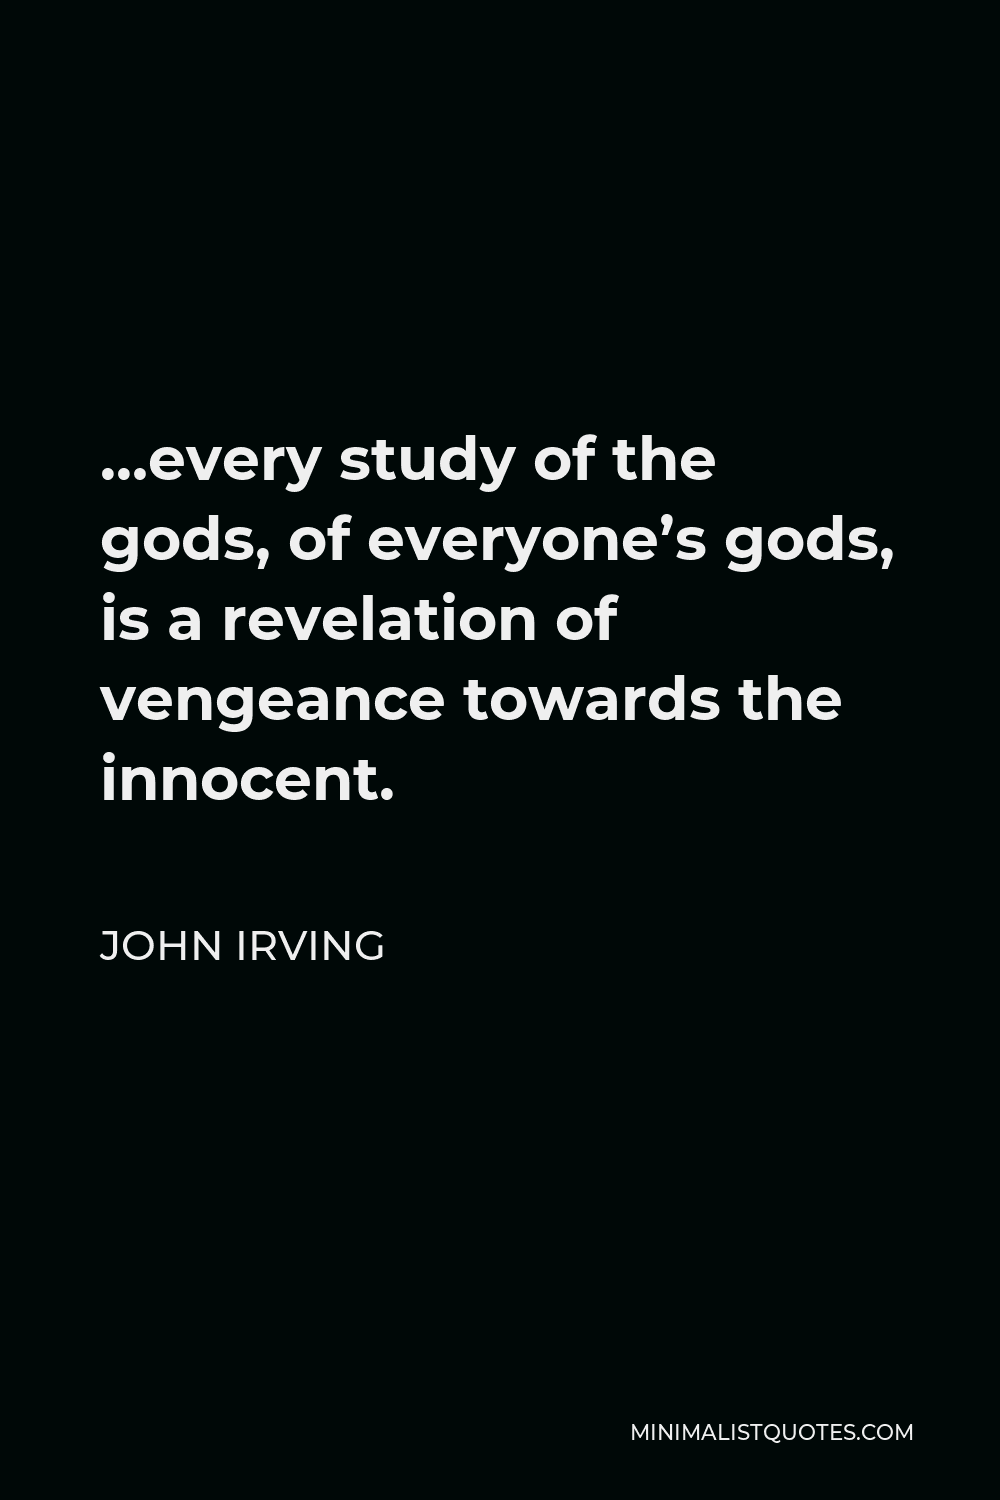 John Irving Quote - …every study of the gods, of everyone’s gods, is a revelation of vengeance towards the innocent.